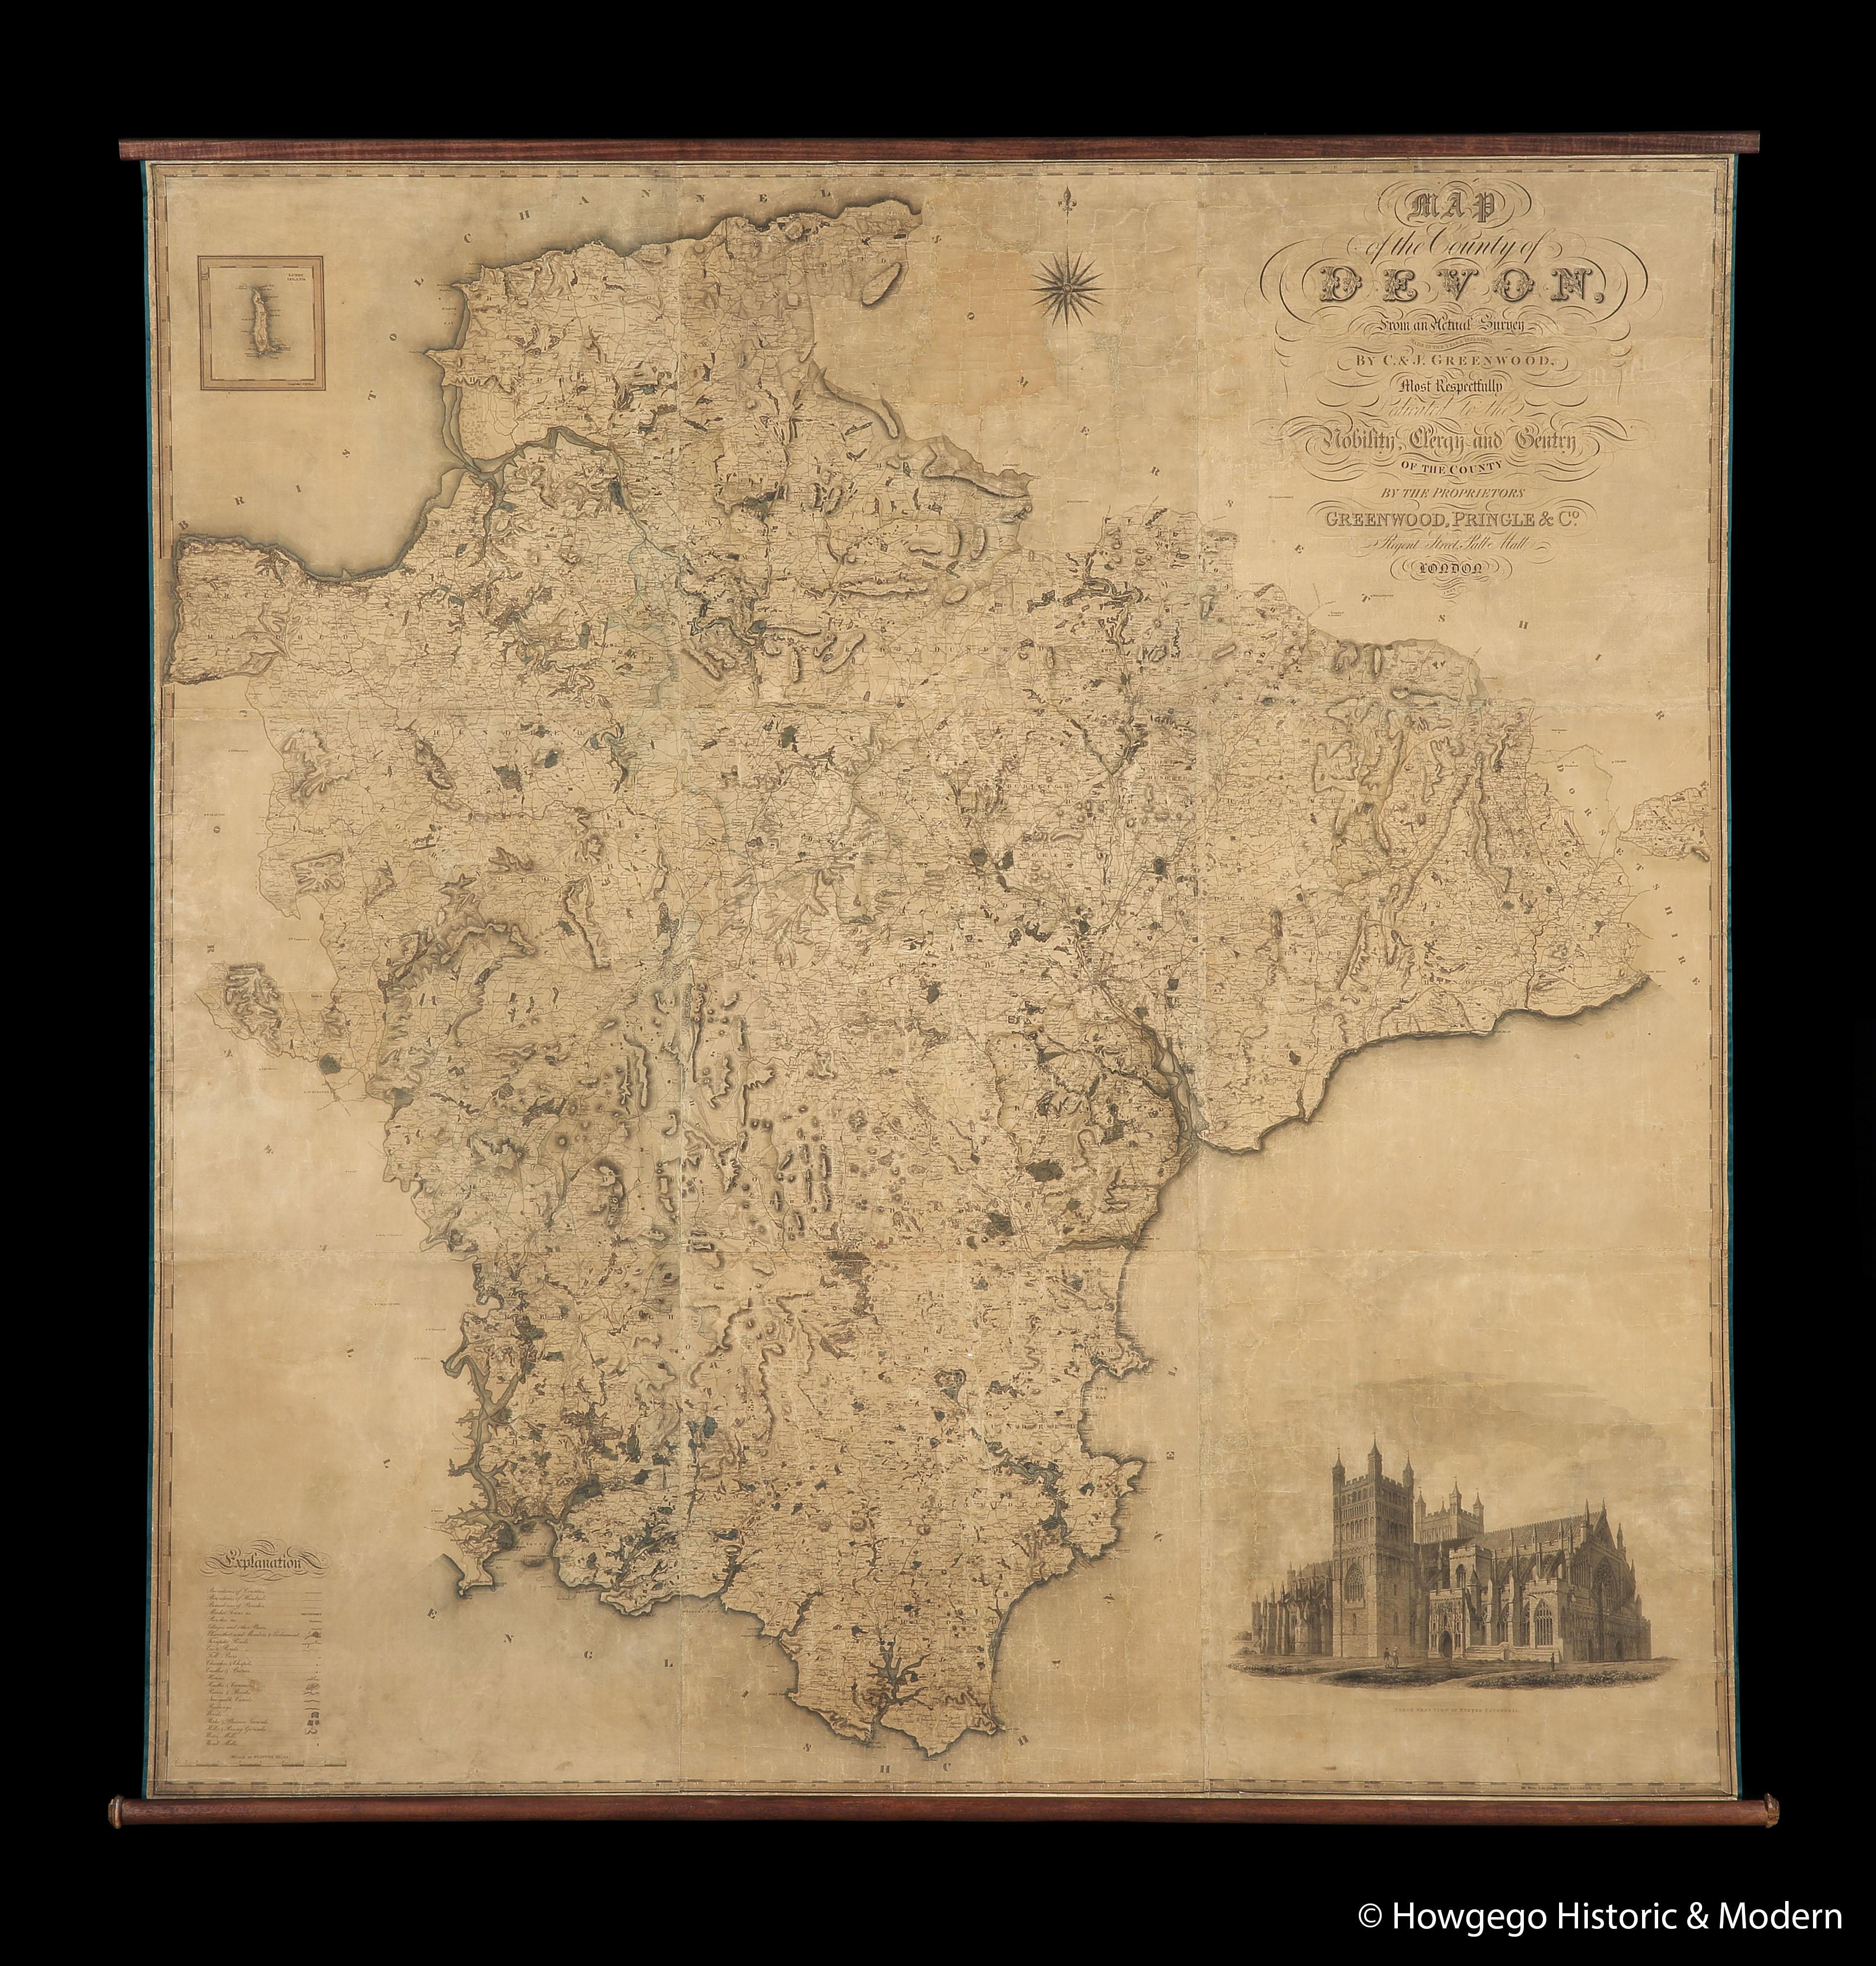 C & J GREENWOOD MAP OF THE COUNTY OF DEVON, FROM AN ORIGINAL SURVEY, PUBLIED 1827, WITH ENGRAVING OF EXETER CATHEDRAL AND MAP OF LUNDY INSET, 6ft 2 ¼